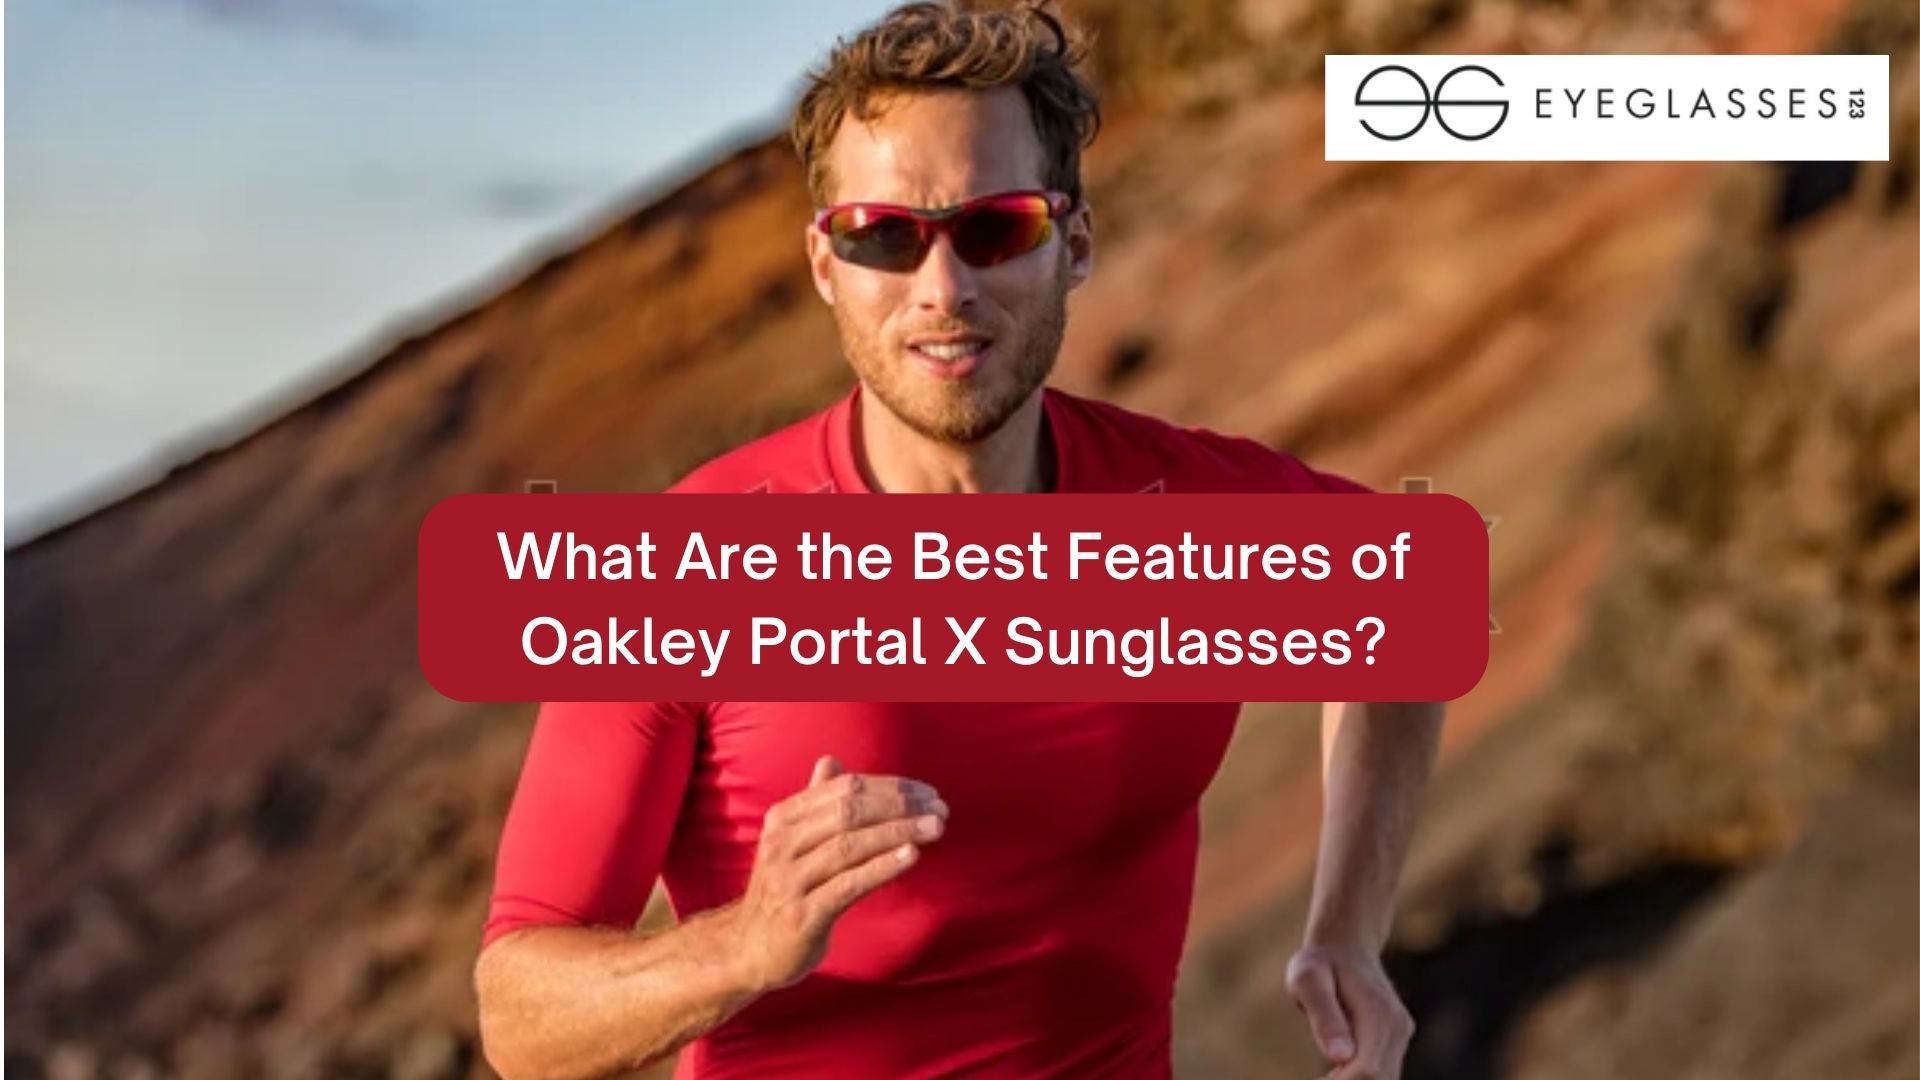 What Are the Best Features of Oakley Portal X Sunglasses?